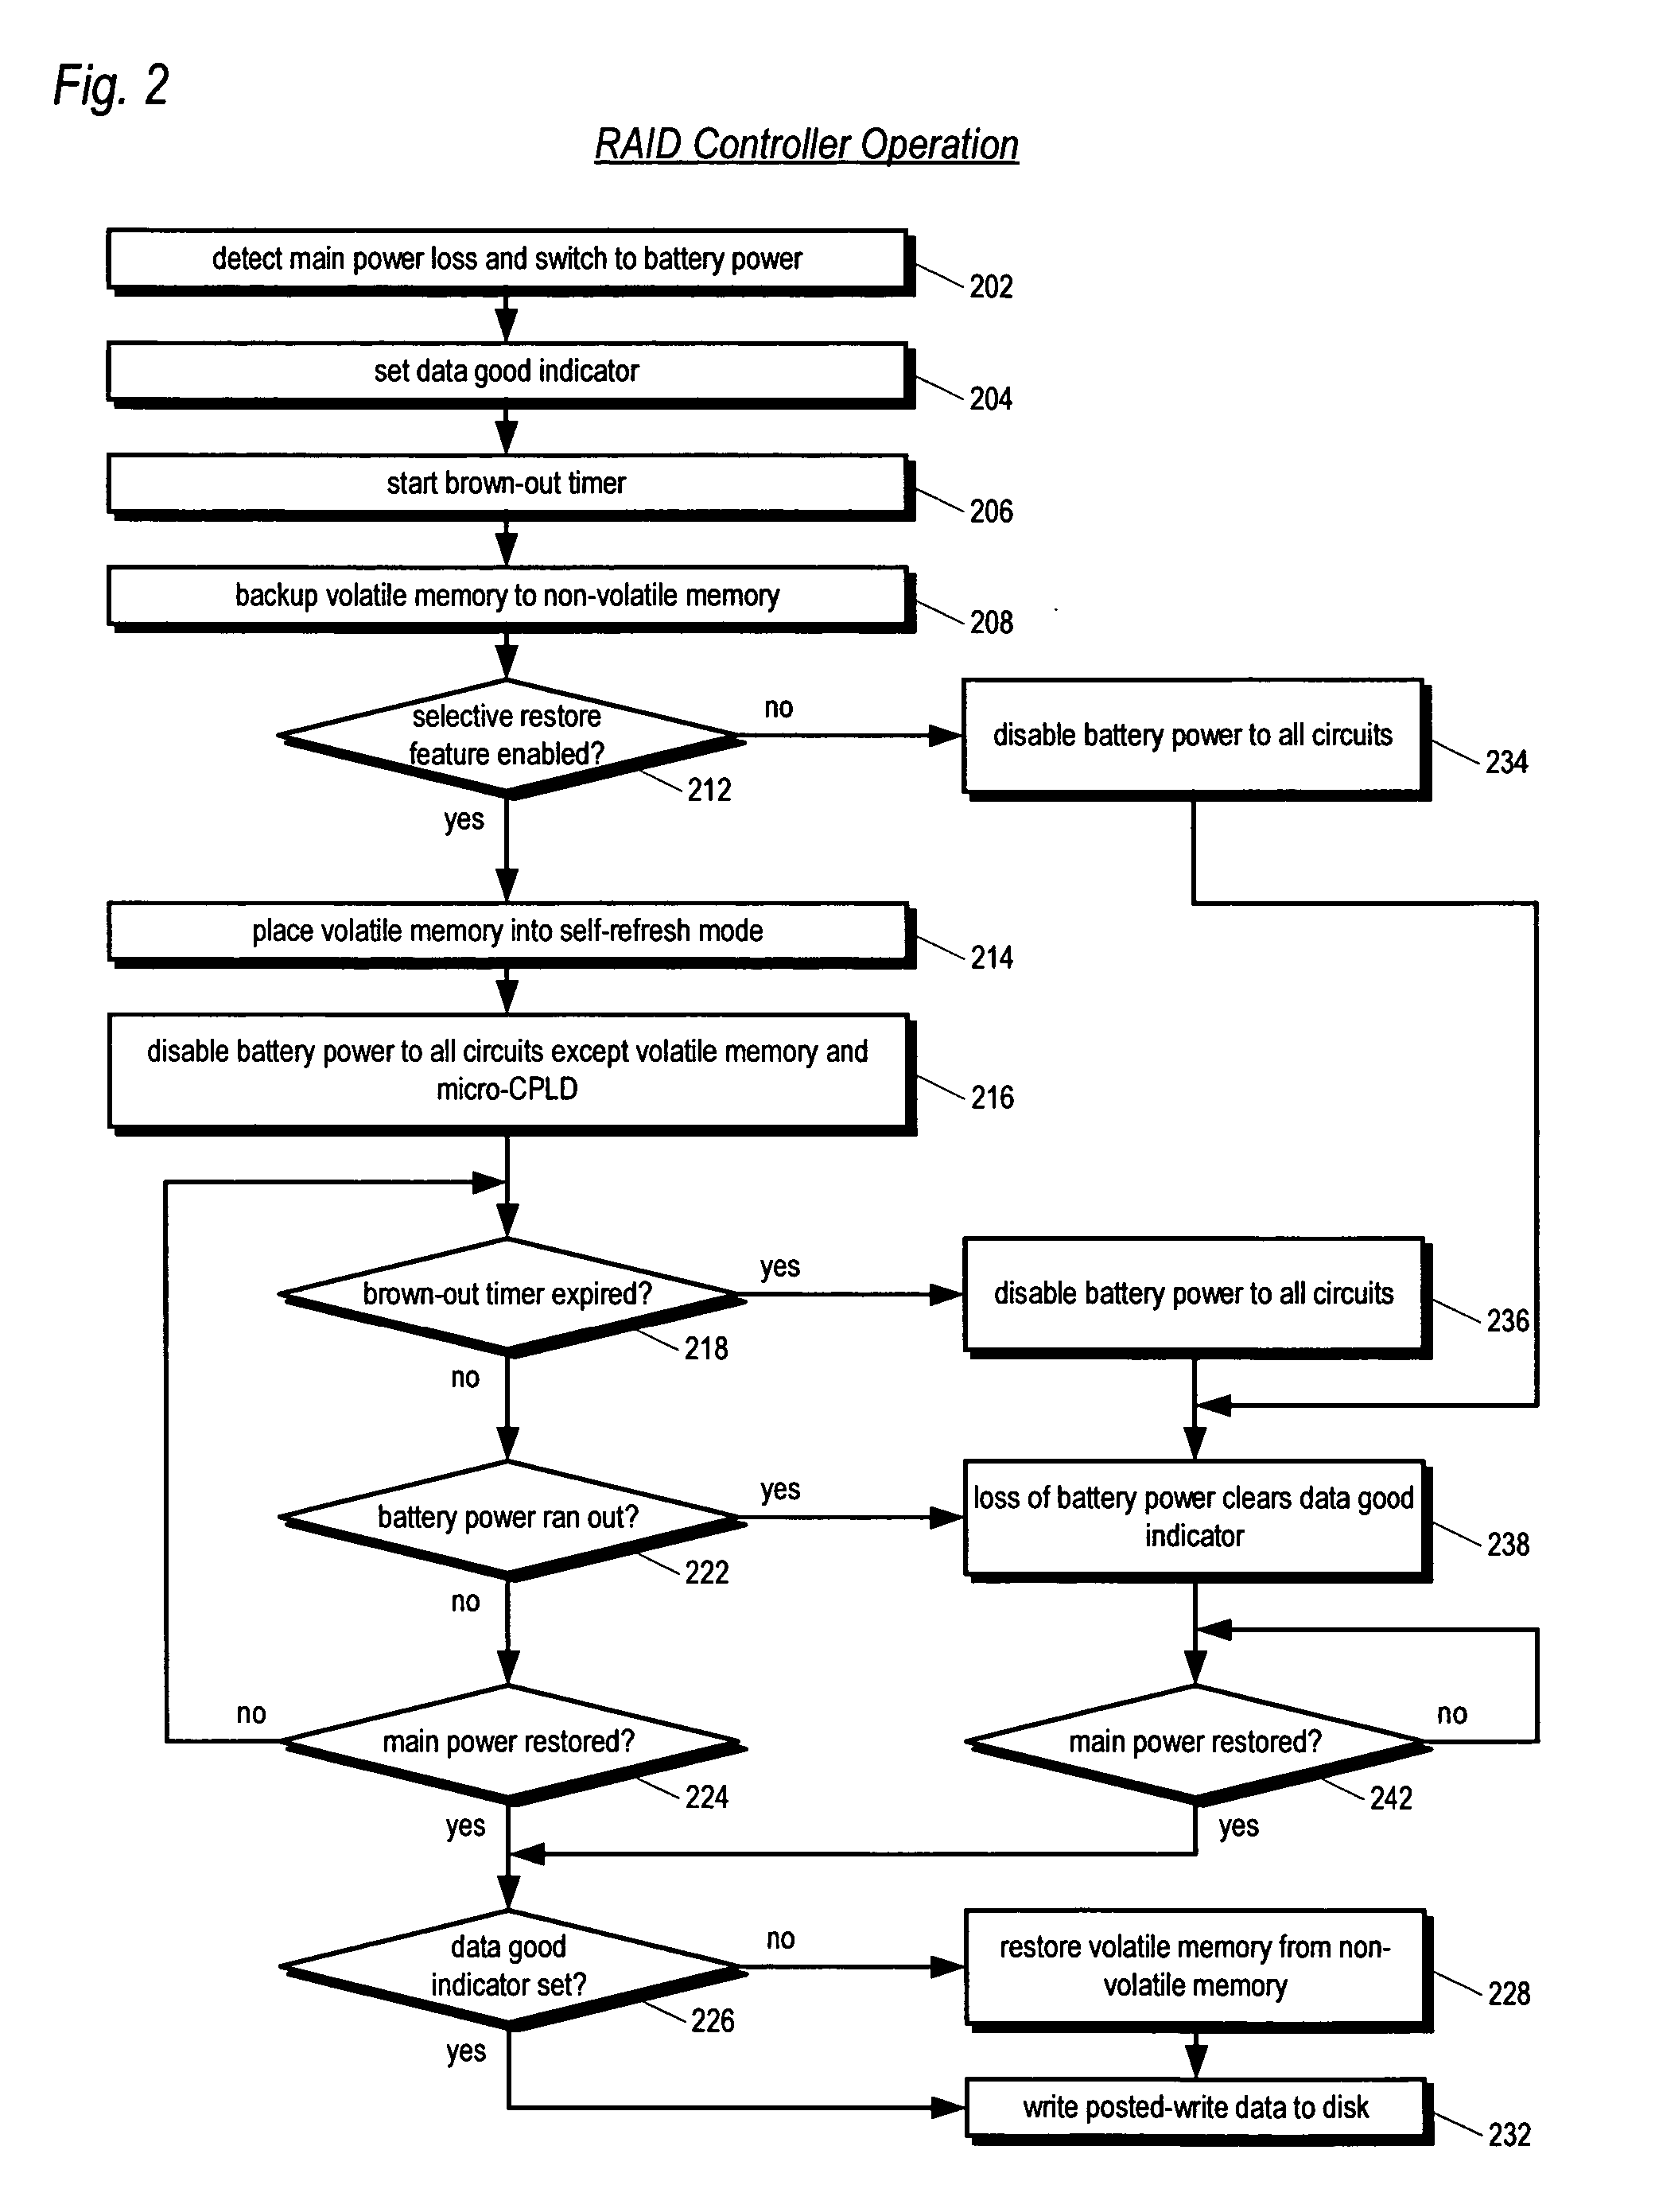 Apparatus and method in a cached raid controller utilizing a solid state backup device for improving data availability time